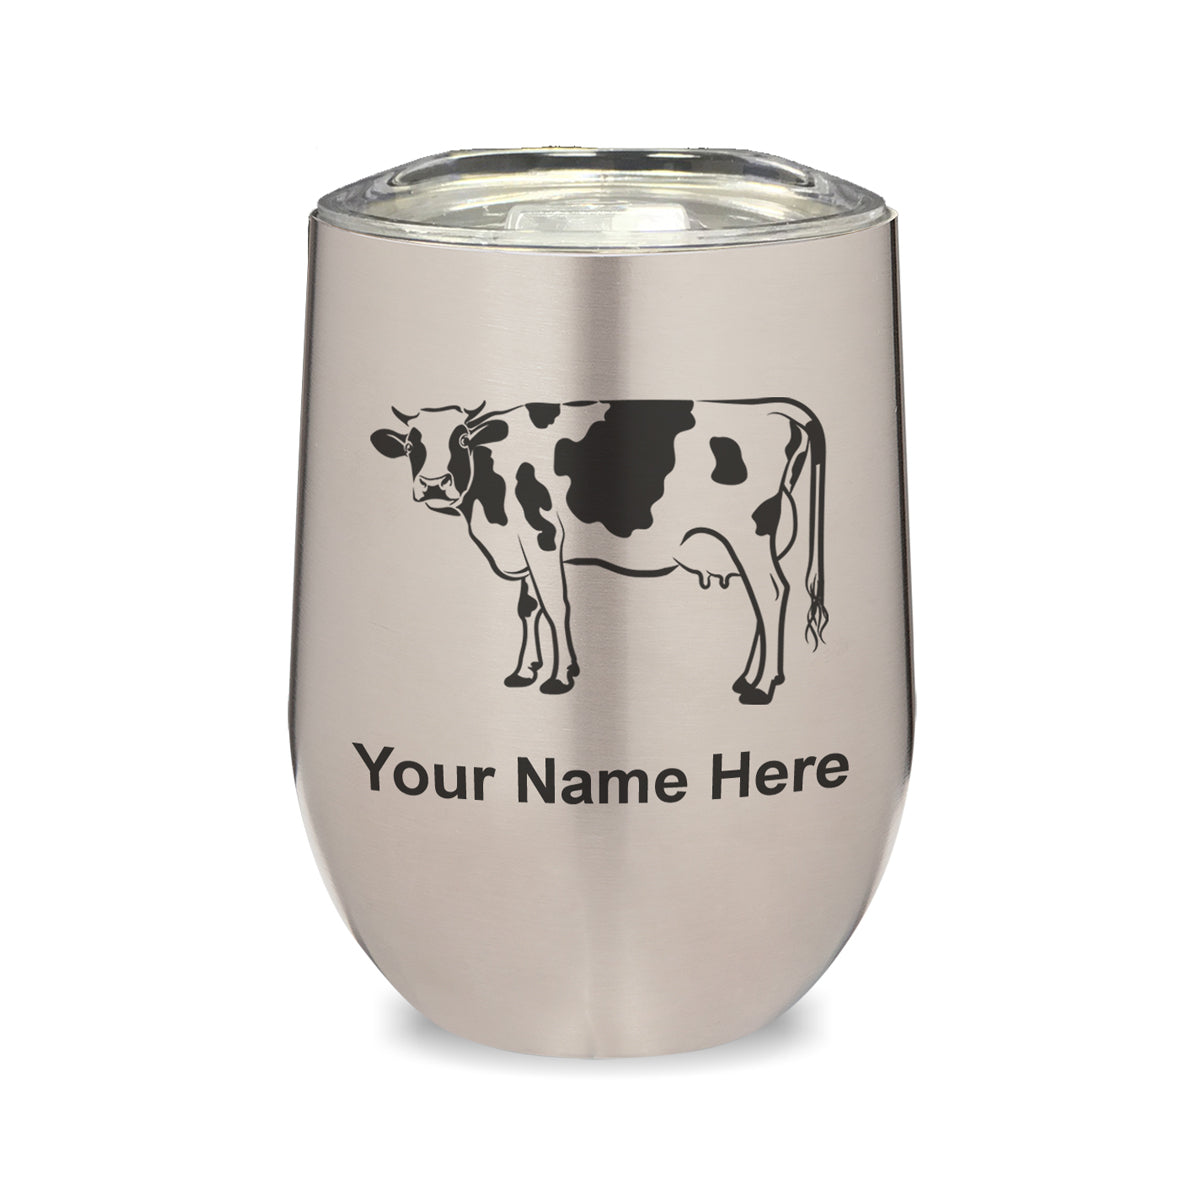 LaserGram Double Wall Stainless Steel Wine Glass, Cow, Personalized Engraving Included